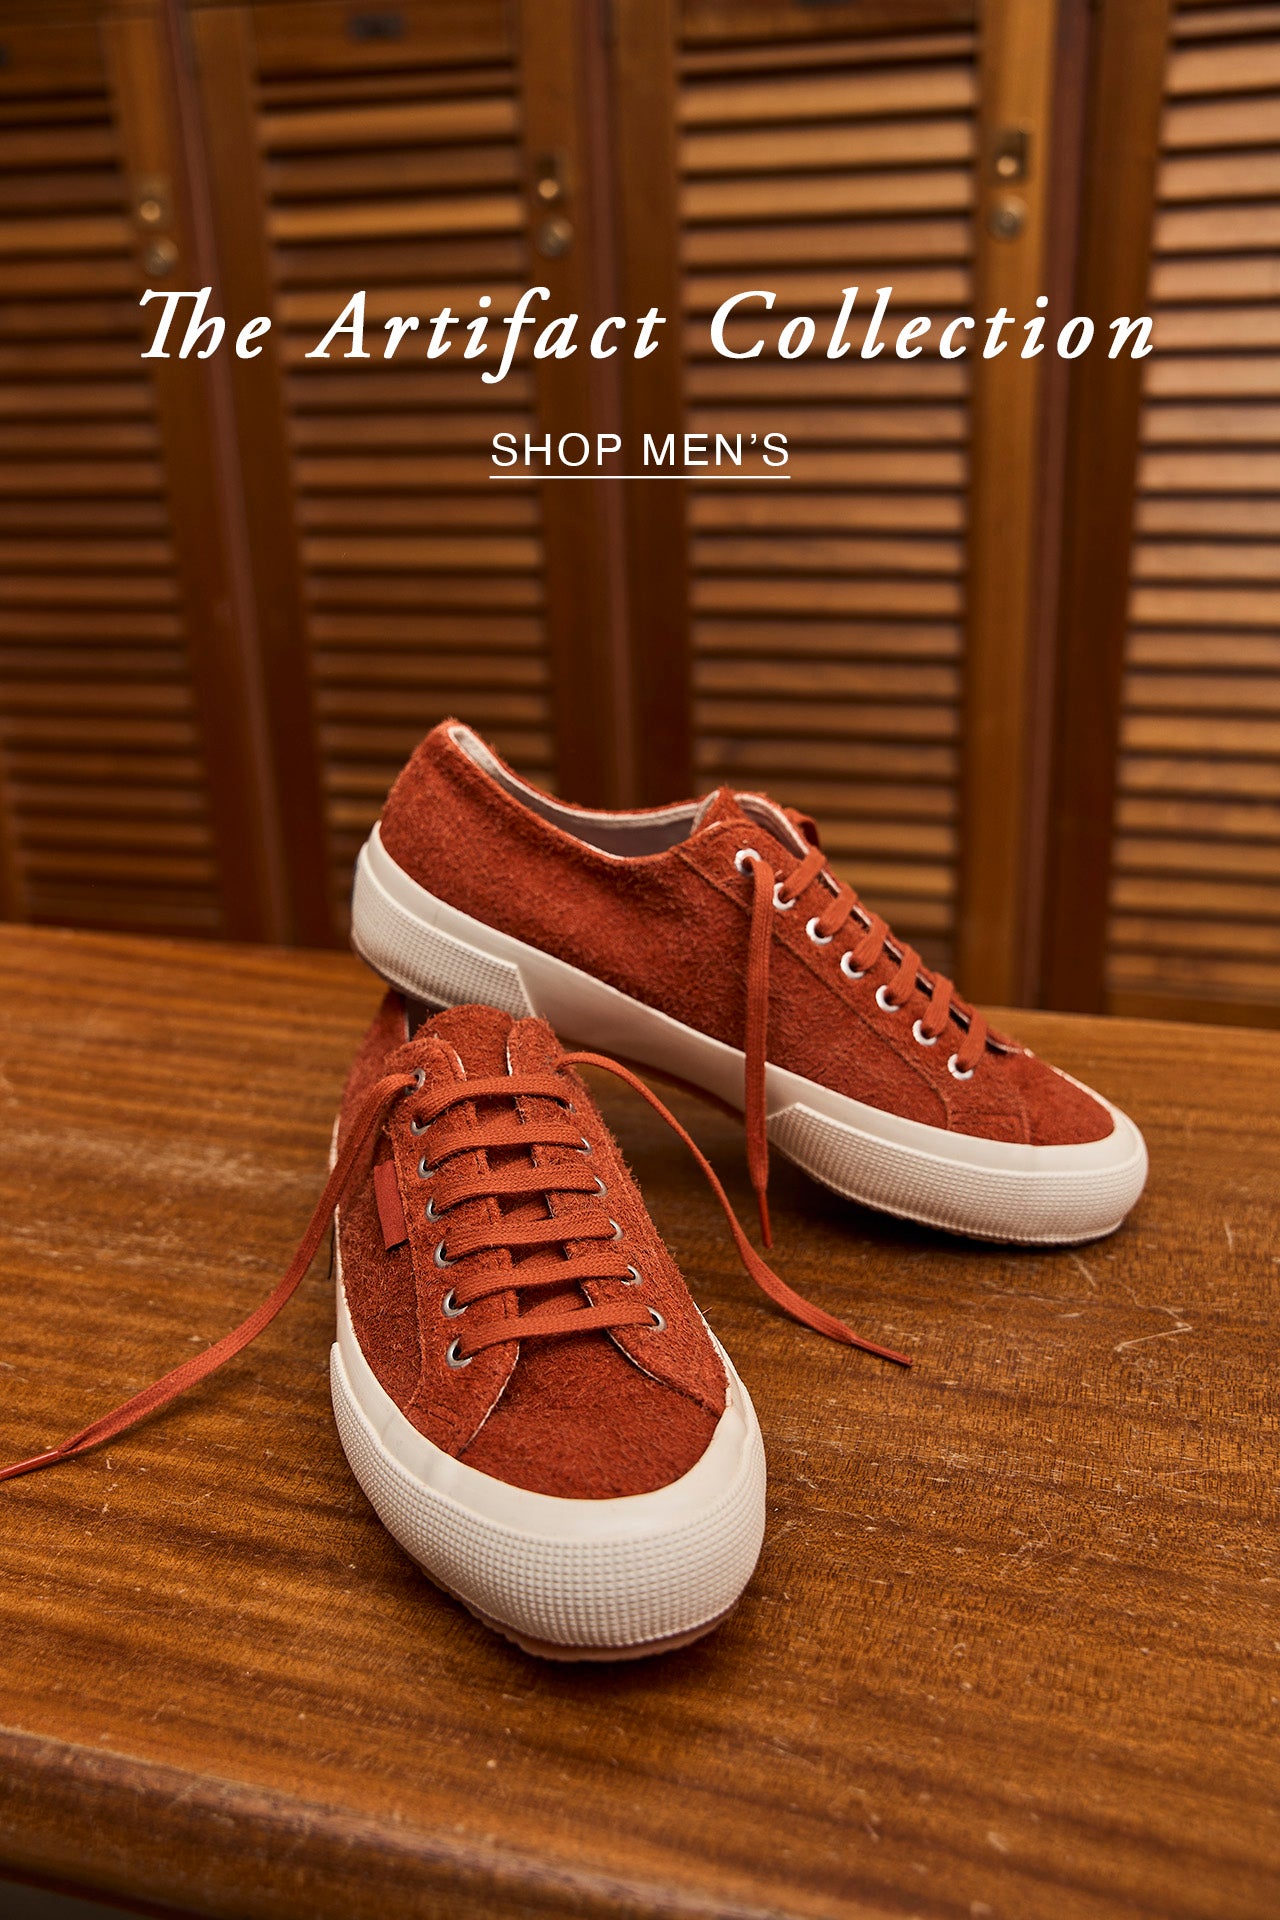 Mens casual dress shoes and best branded casual shoes for men | Brand:  Superga; Style: Casual